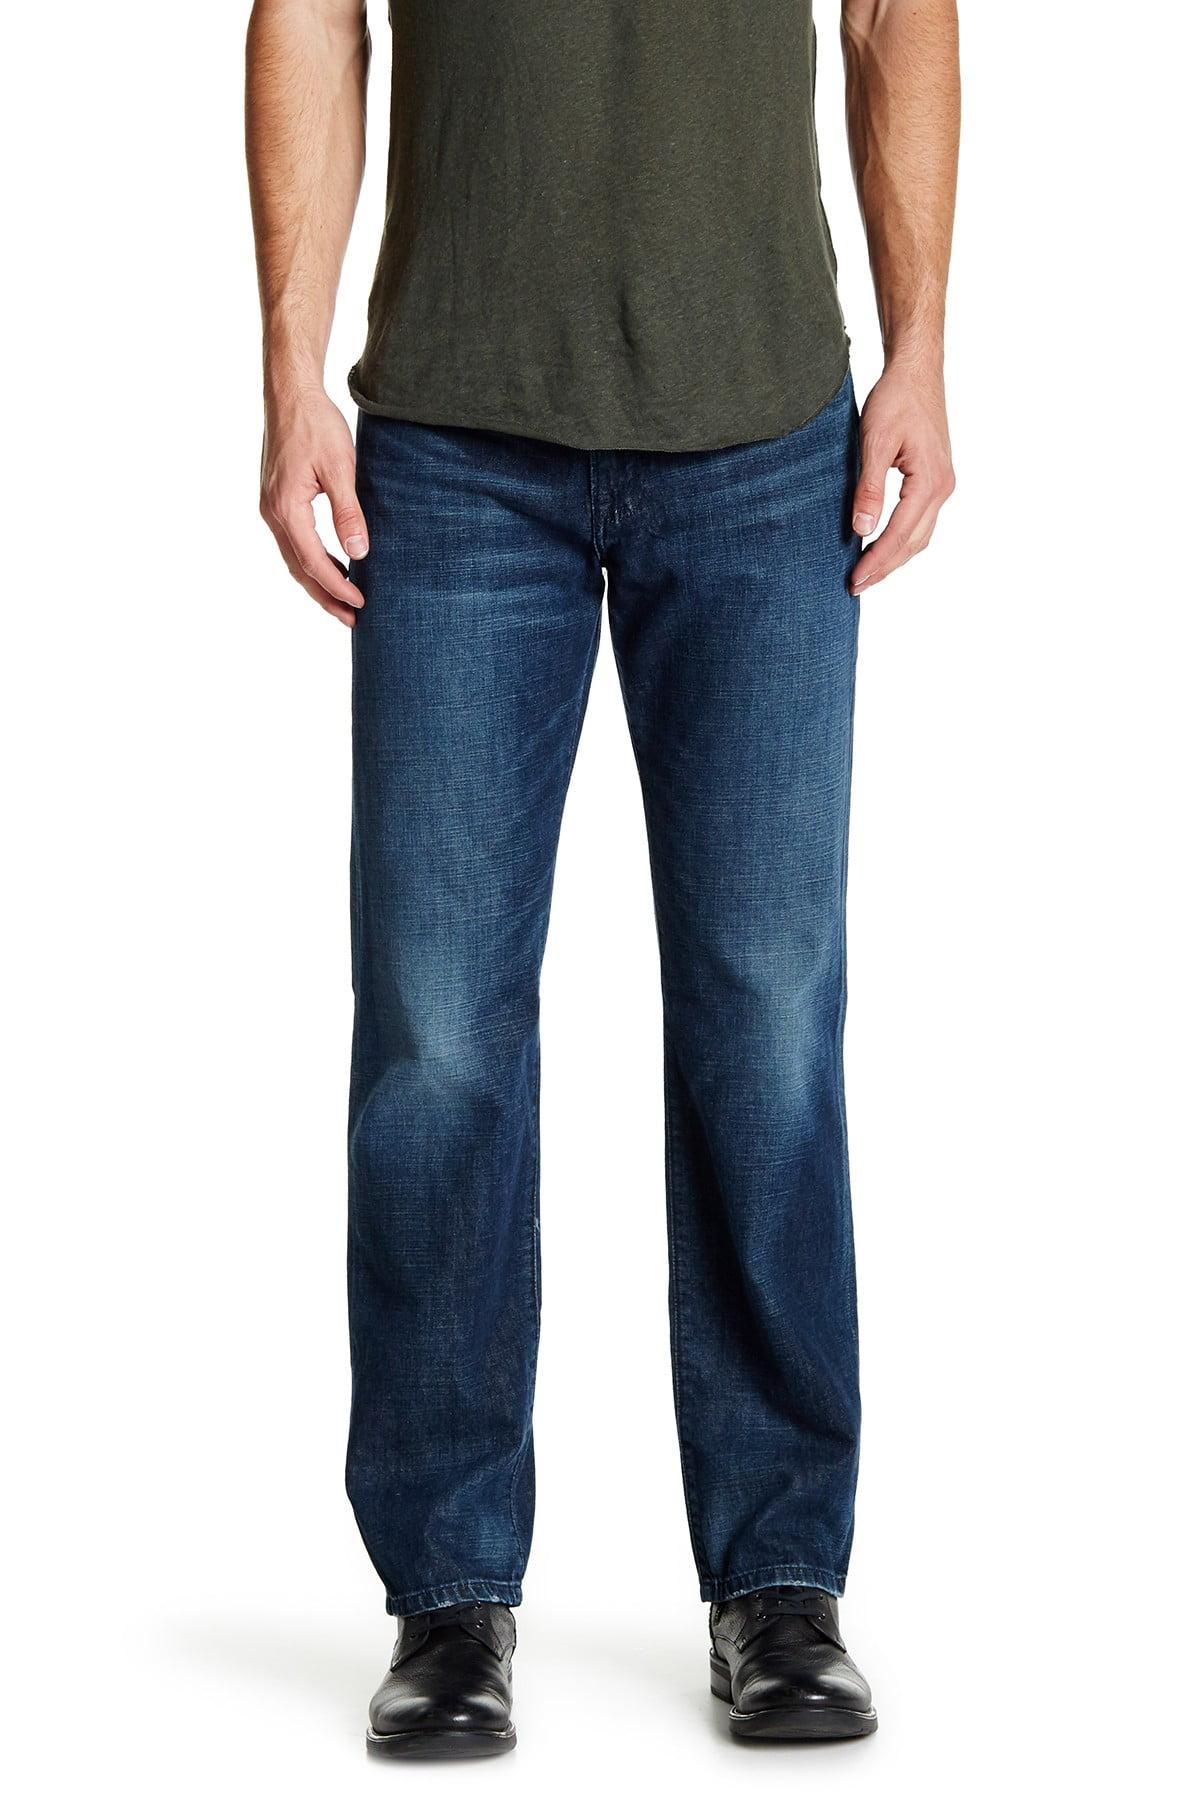 Lucky Brand 100% Cotton Classic, Straight Leg Jeans for Men